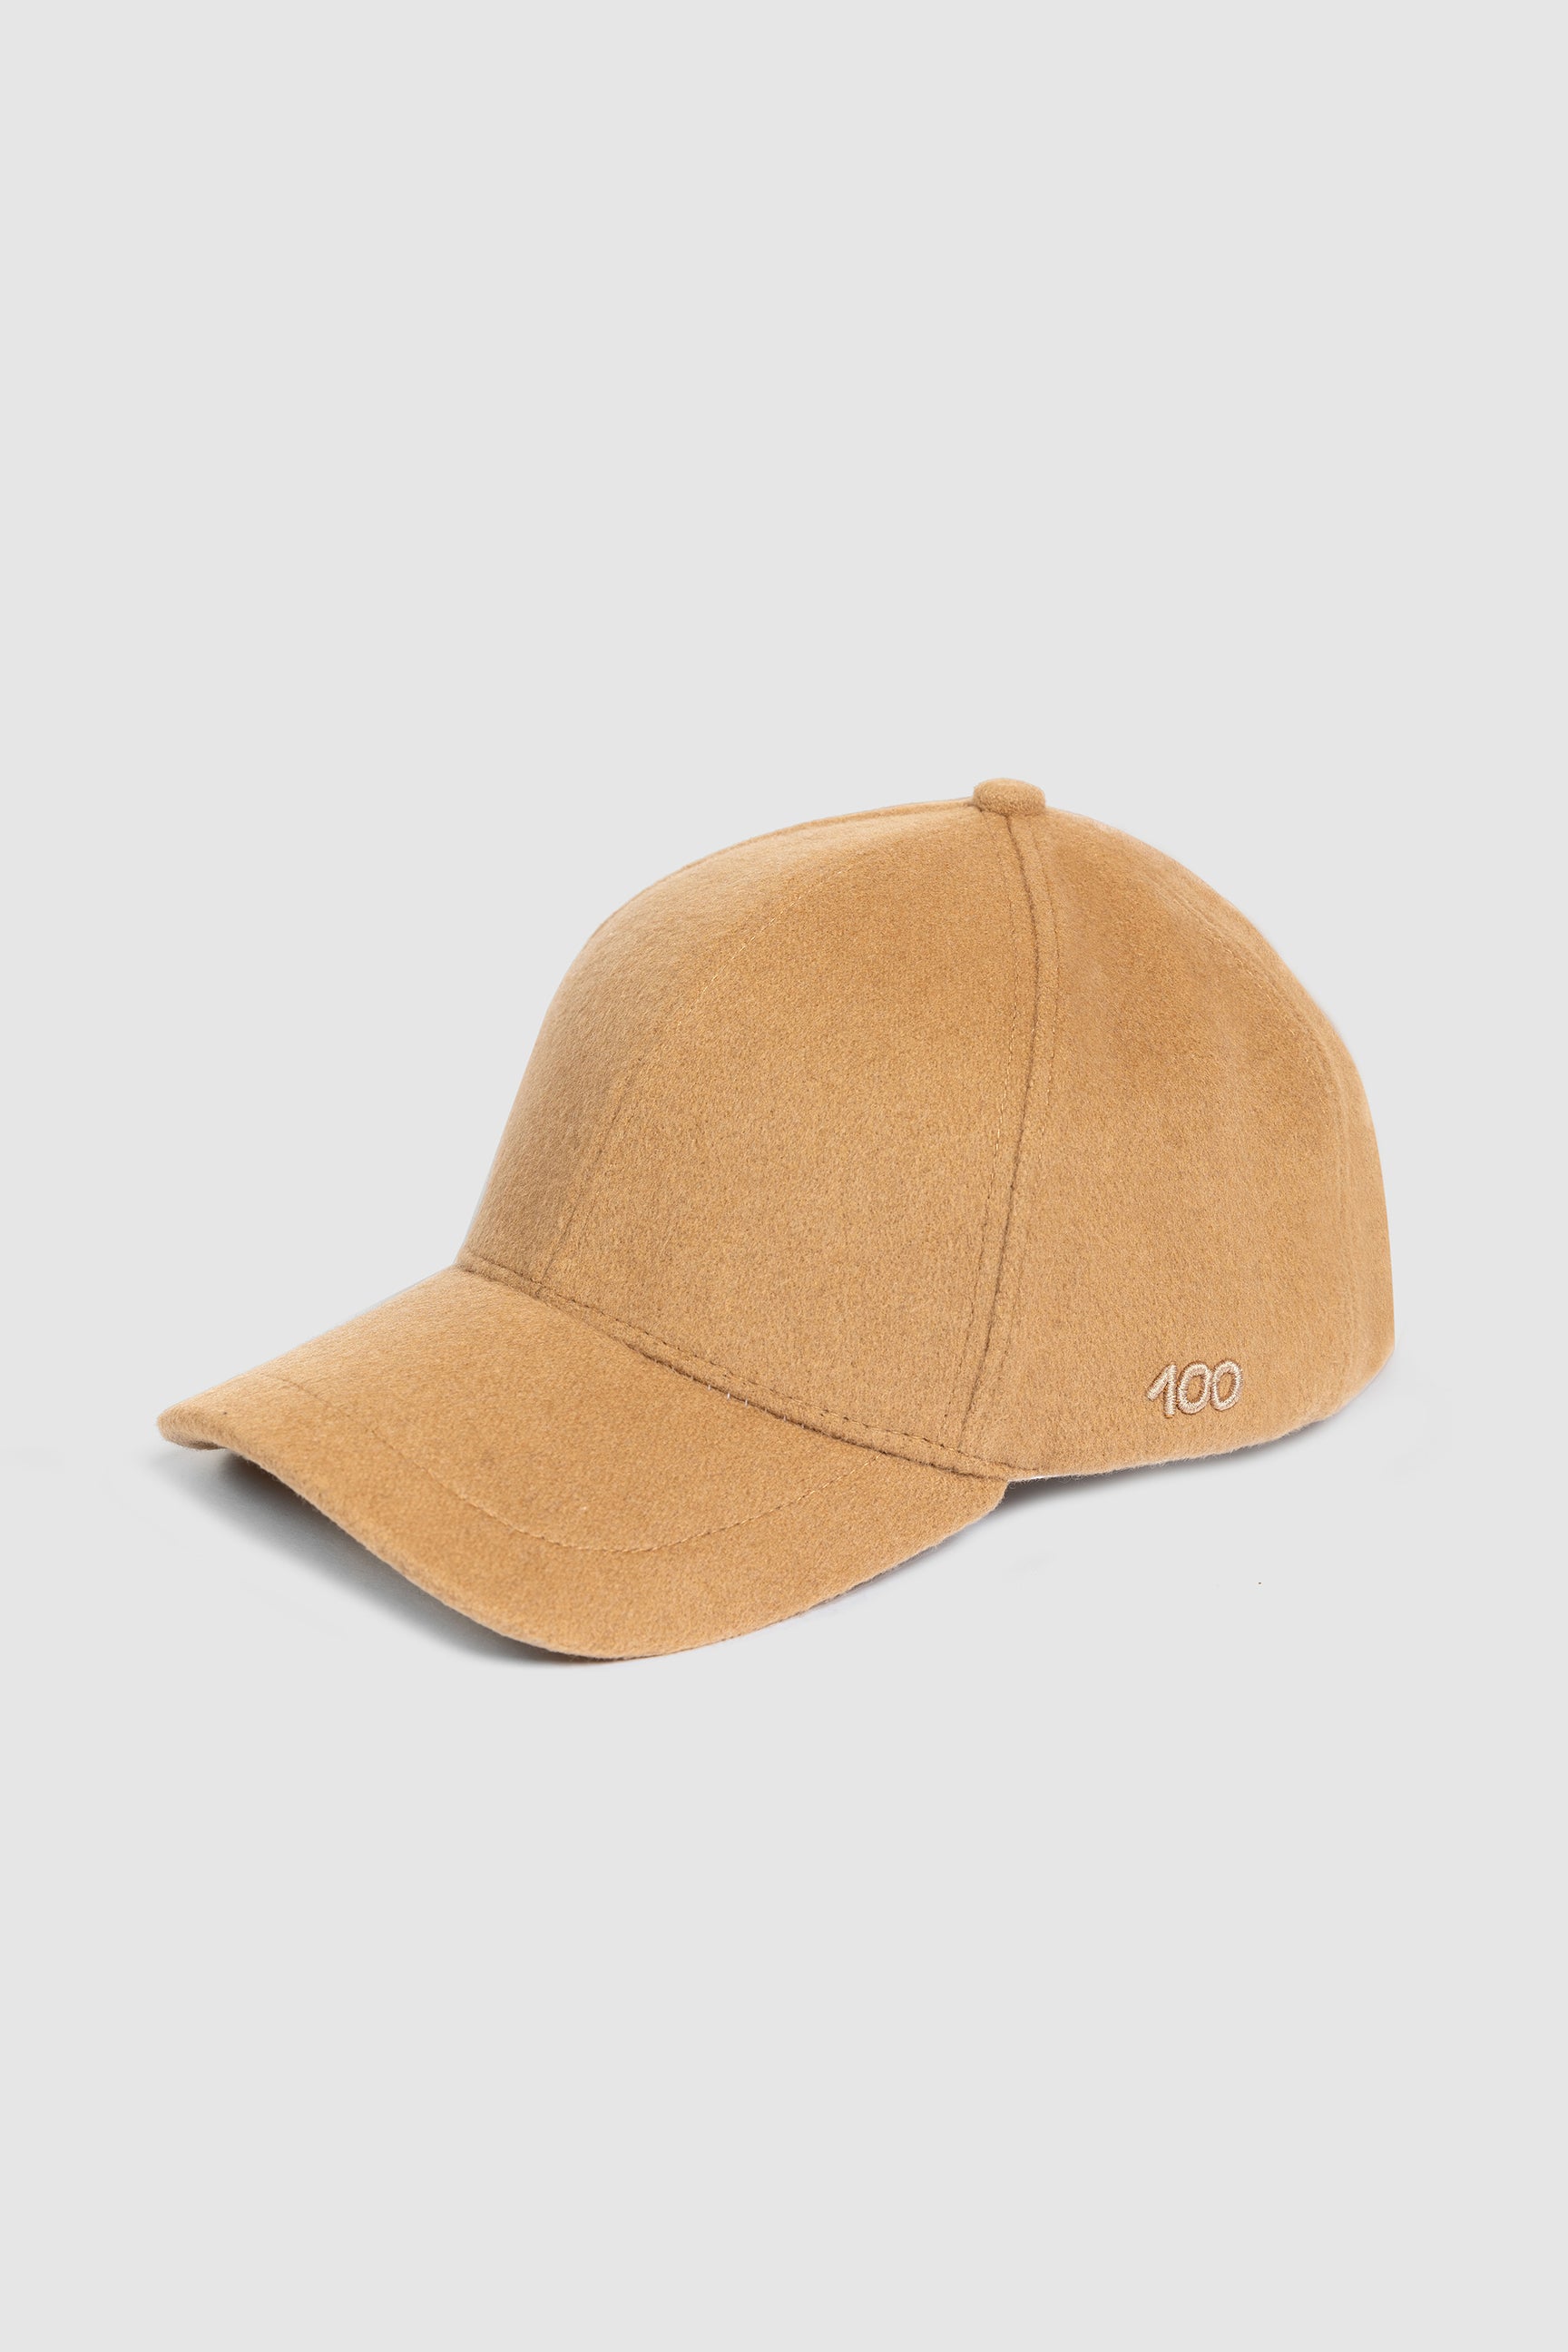 The 100 Cap in Camel Cashmere (Camel (499) / One Size)